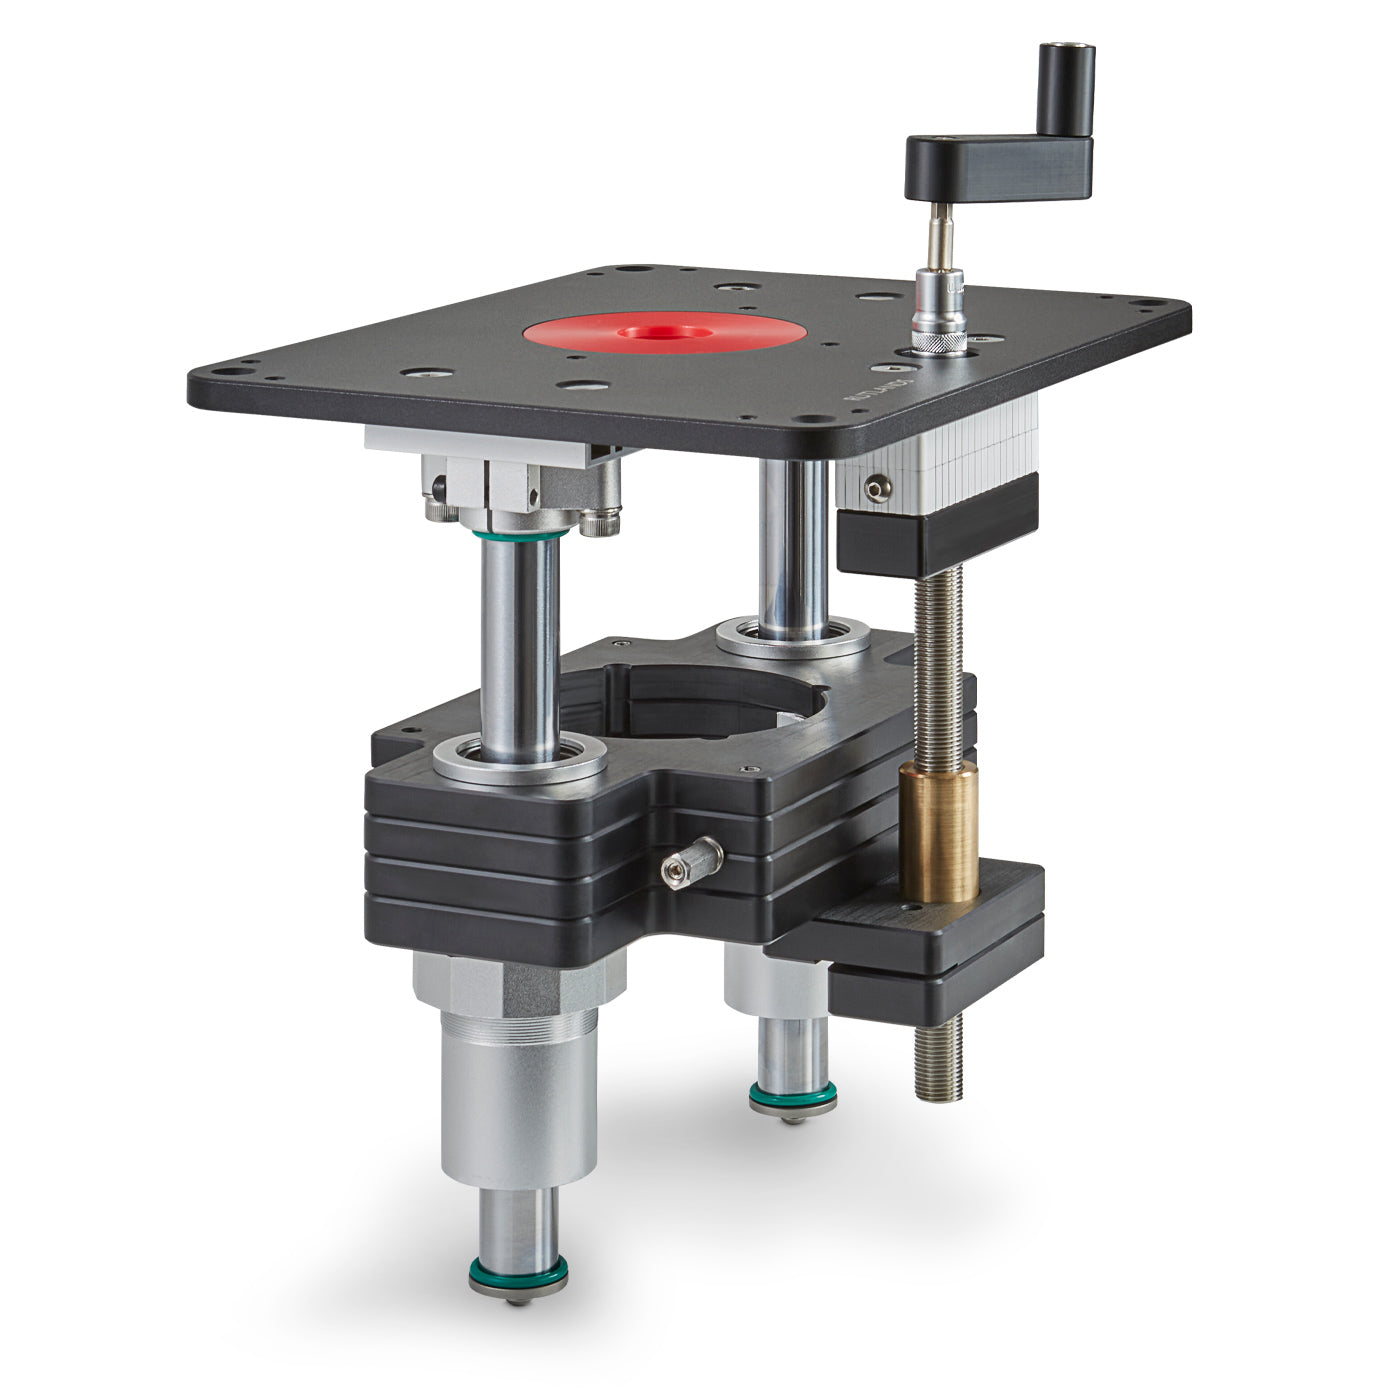 Phenolic Router Table - R15 Lift and Motor